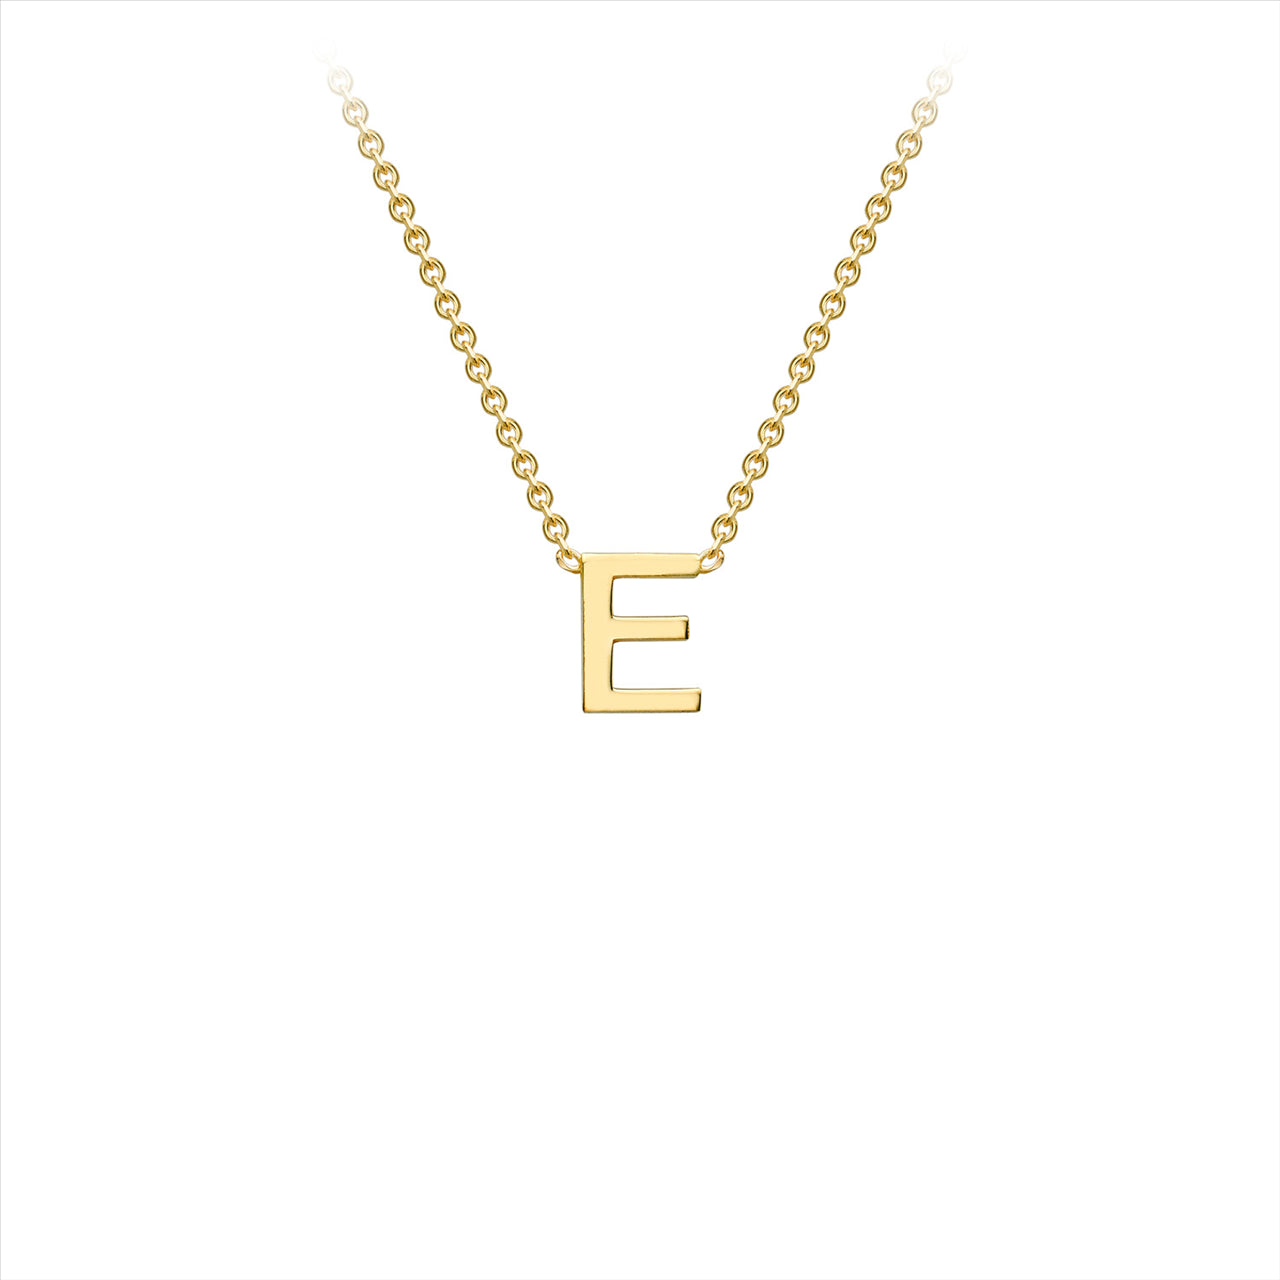 9ct yellow gold initial "E" pendant with 9ct yellow gold cable style chain 38+5cm